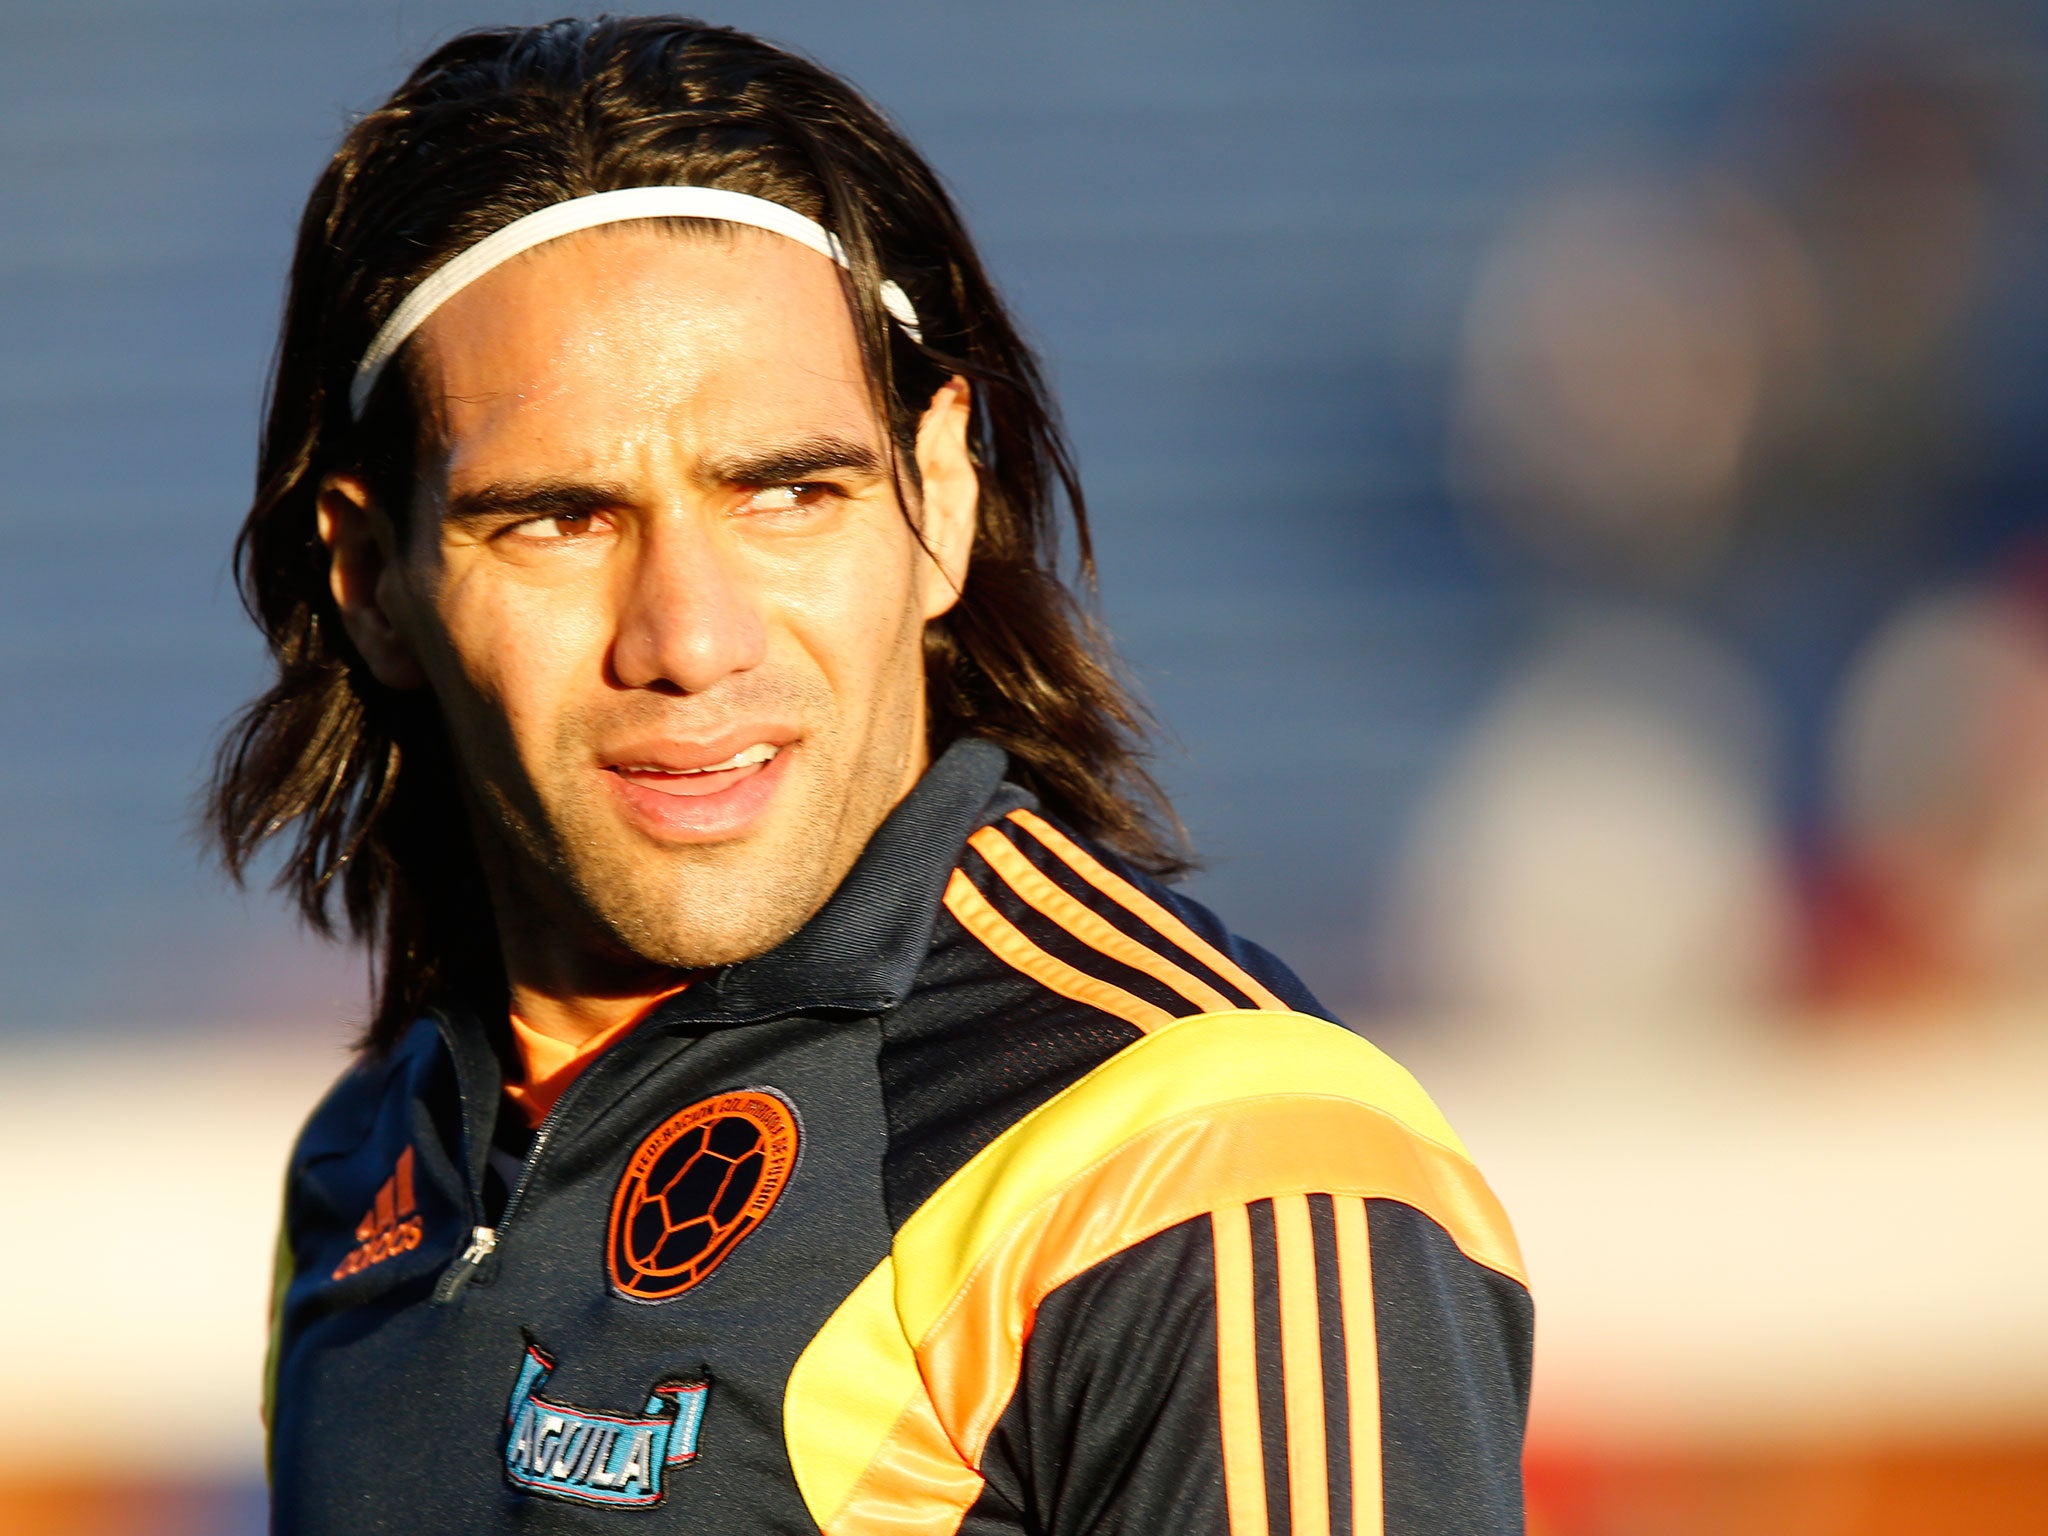 Radamel Falcao has agreed to sign for Manchester United on loan